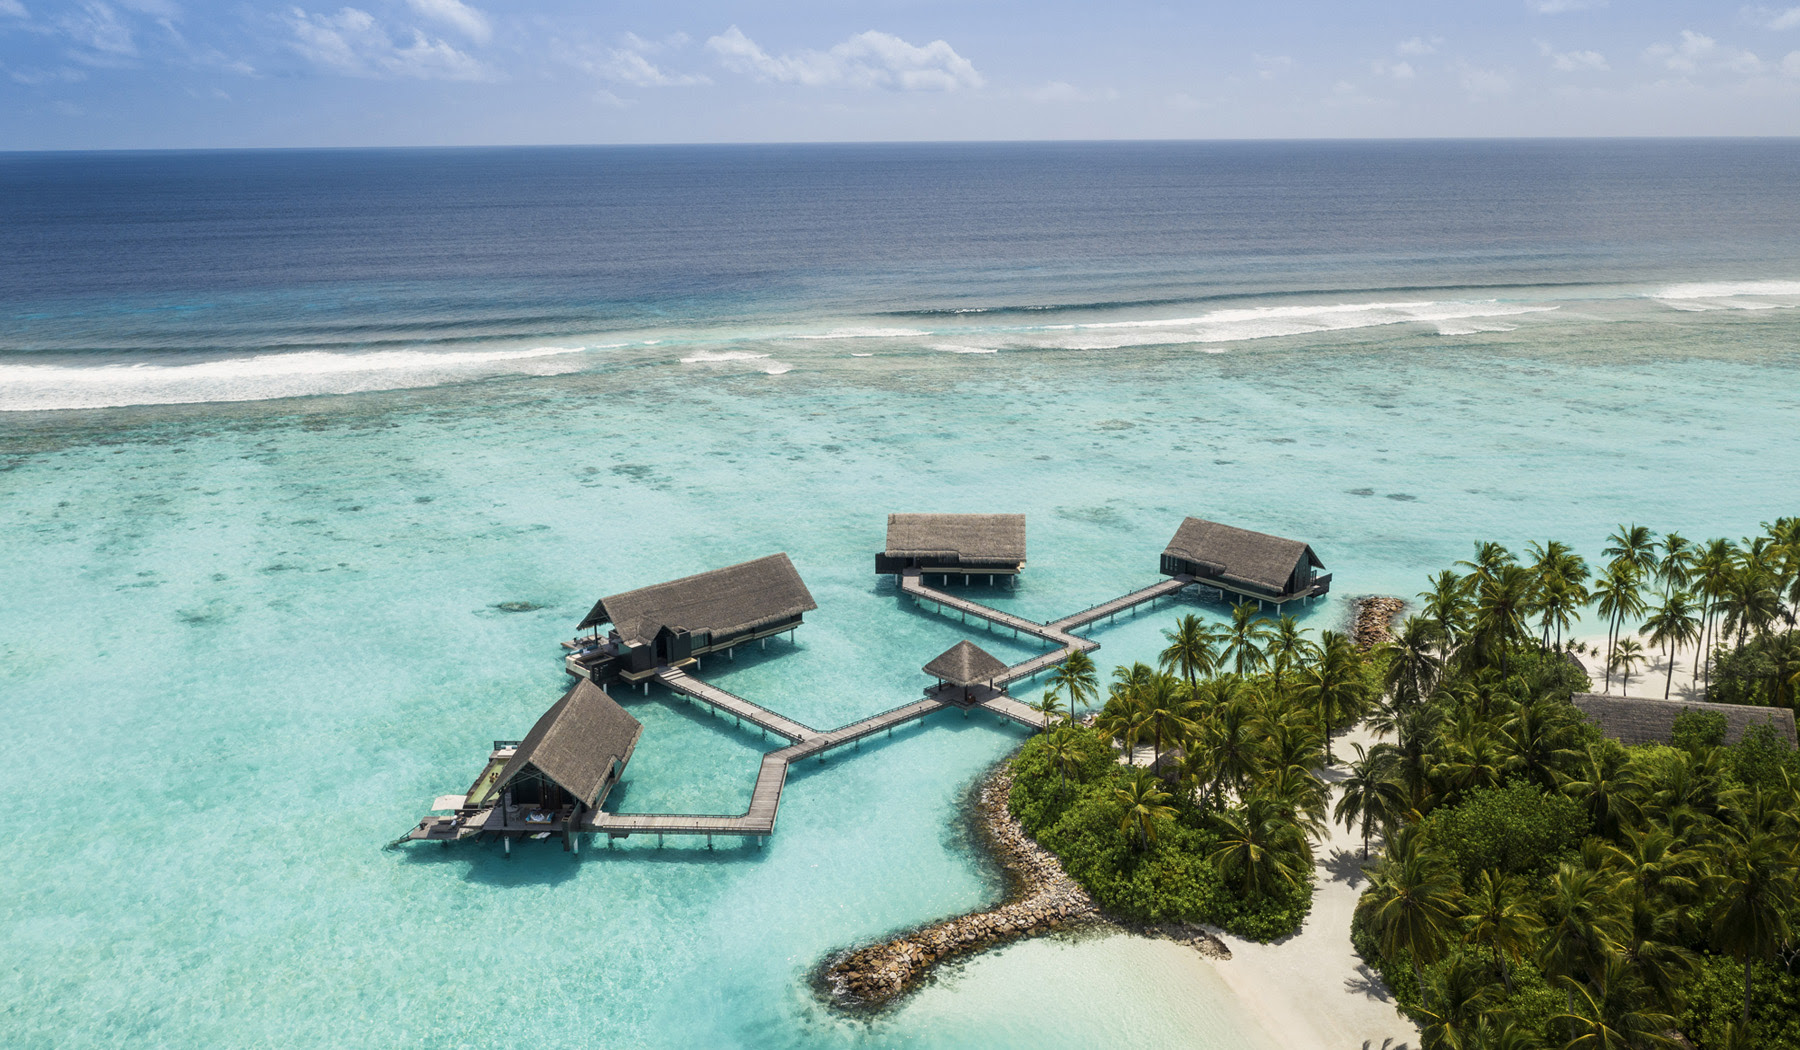 A getaway to the Maldives with One&Only Reethi Rah